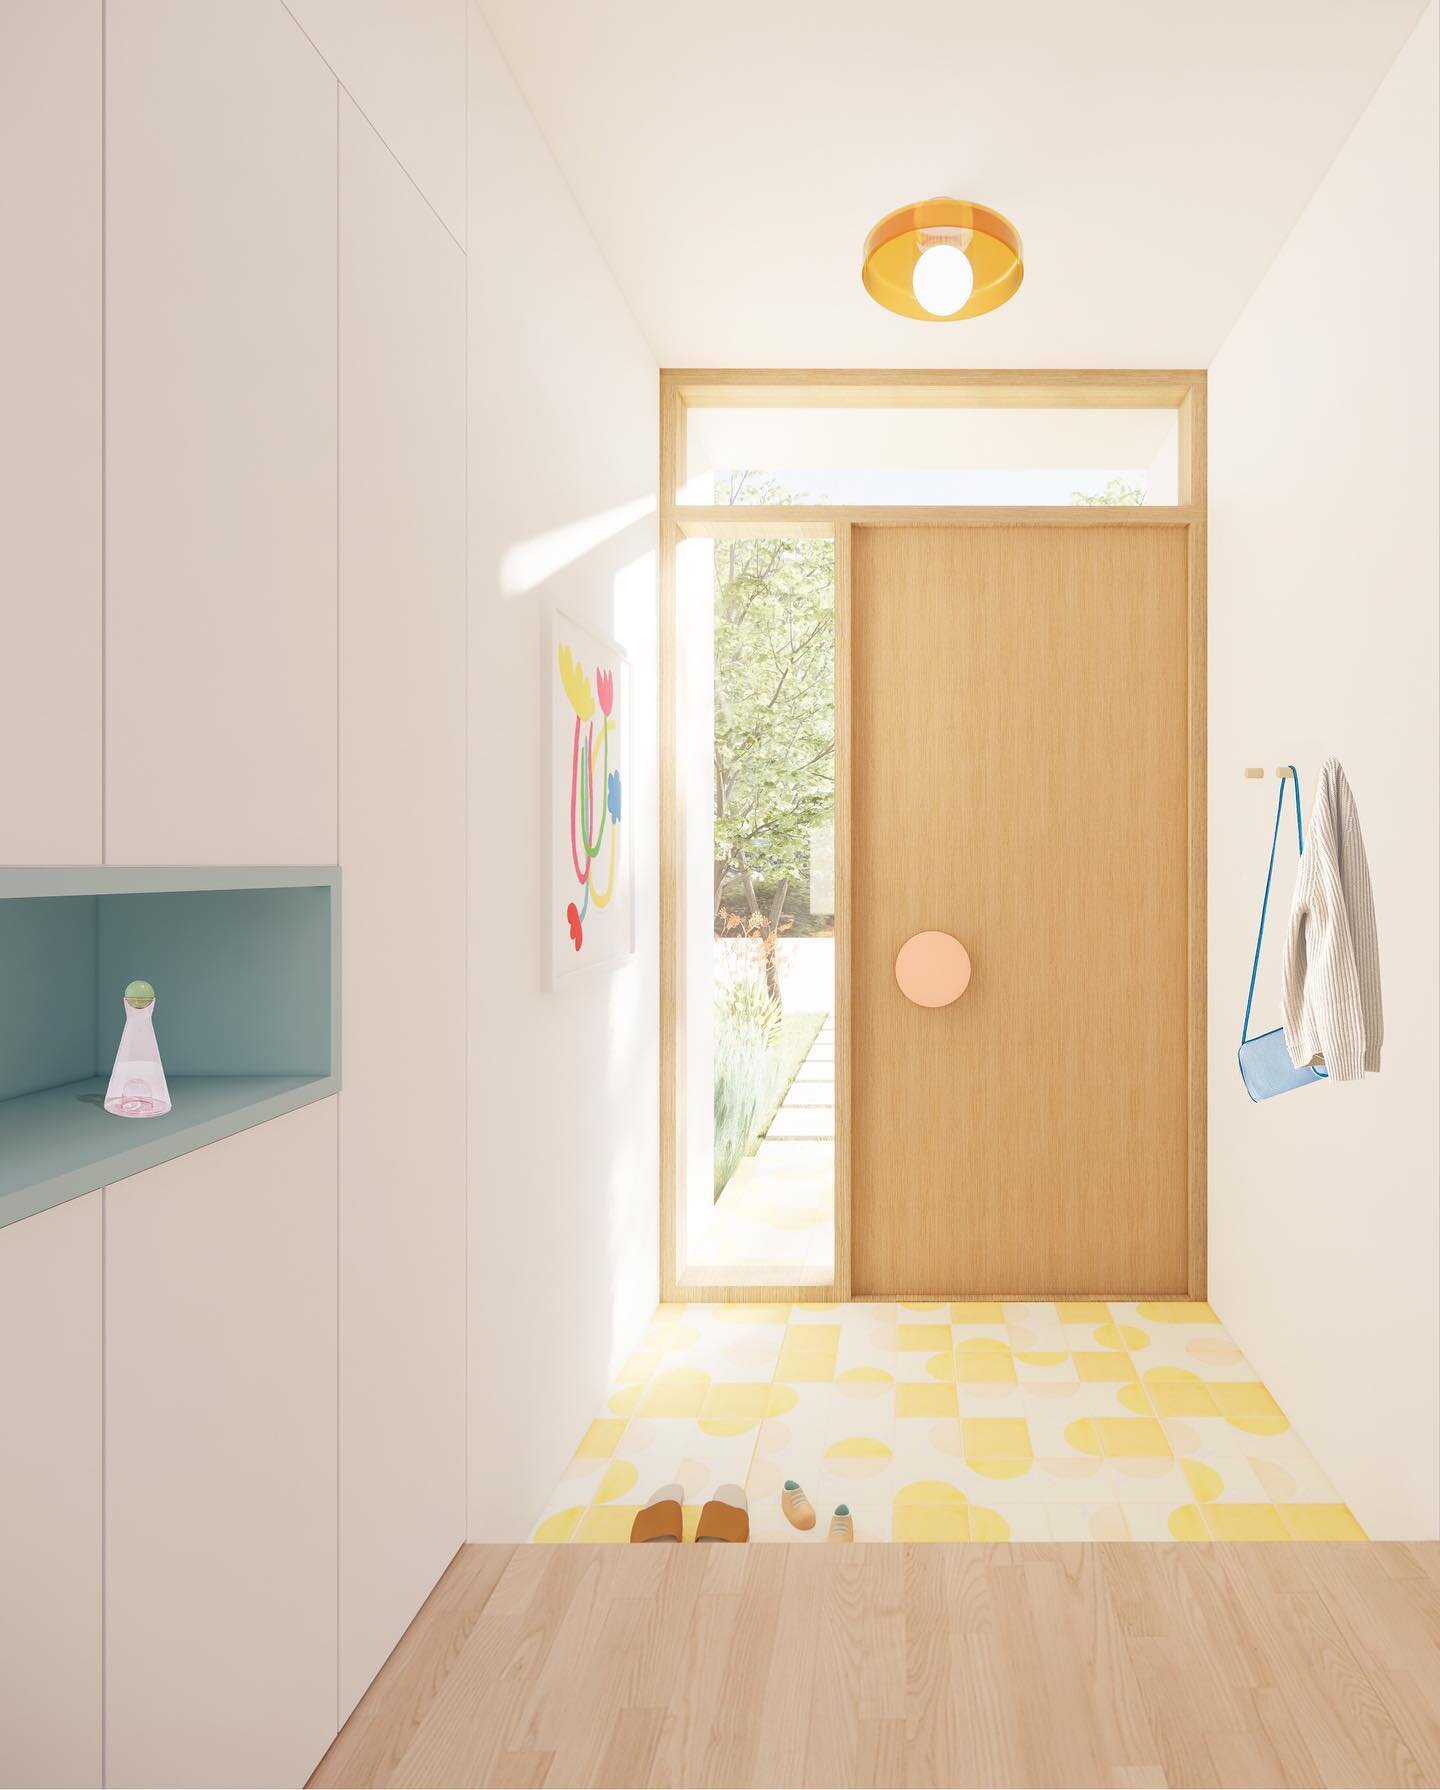 An entry concept that invites spring into the house. 🐛🌞🌱Looking forward to sharing more about our new project ! 
Illustration in the image is by Airi Kuroda
.
.
.
#springisalmosthere #entrydesign #builtincloset #wooddoor #tileinspiration #interior